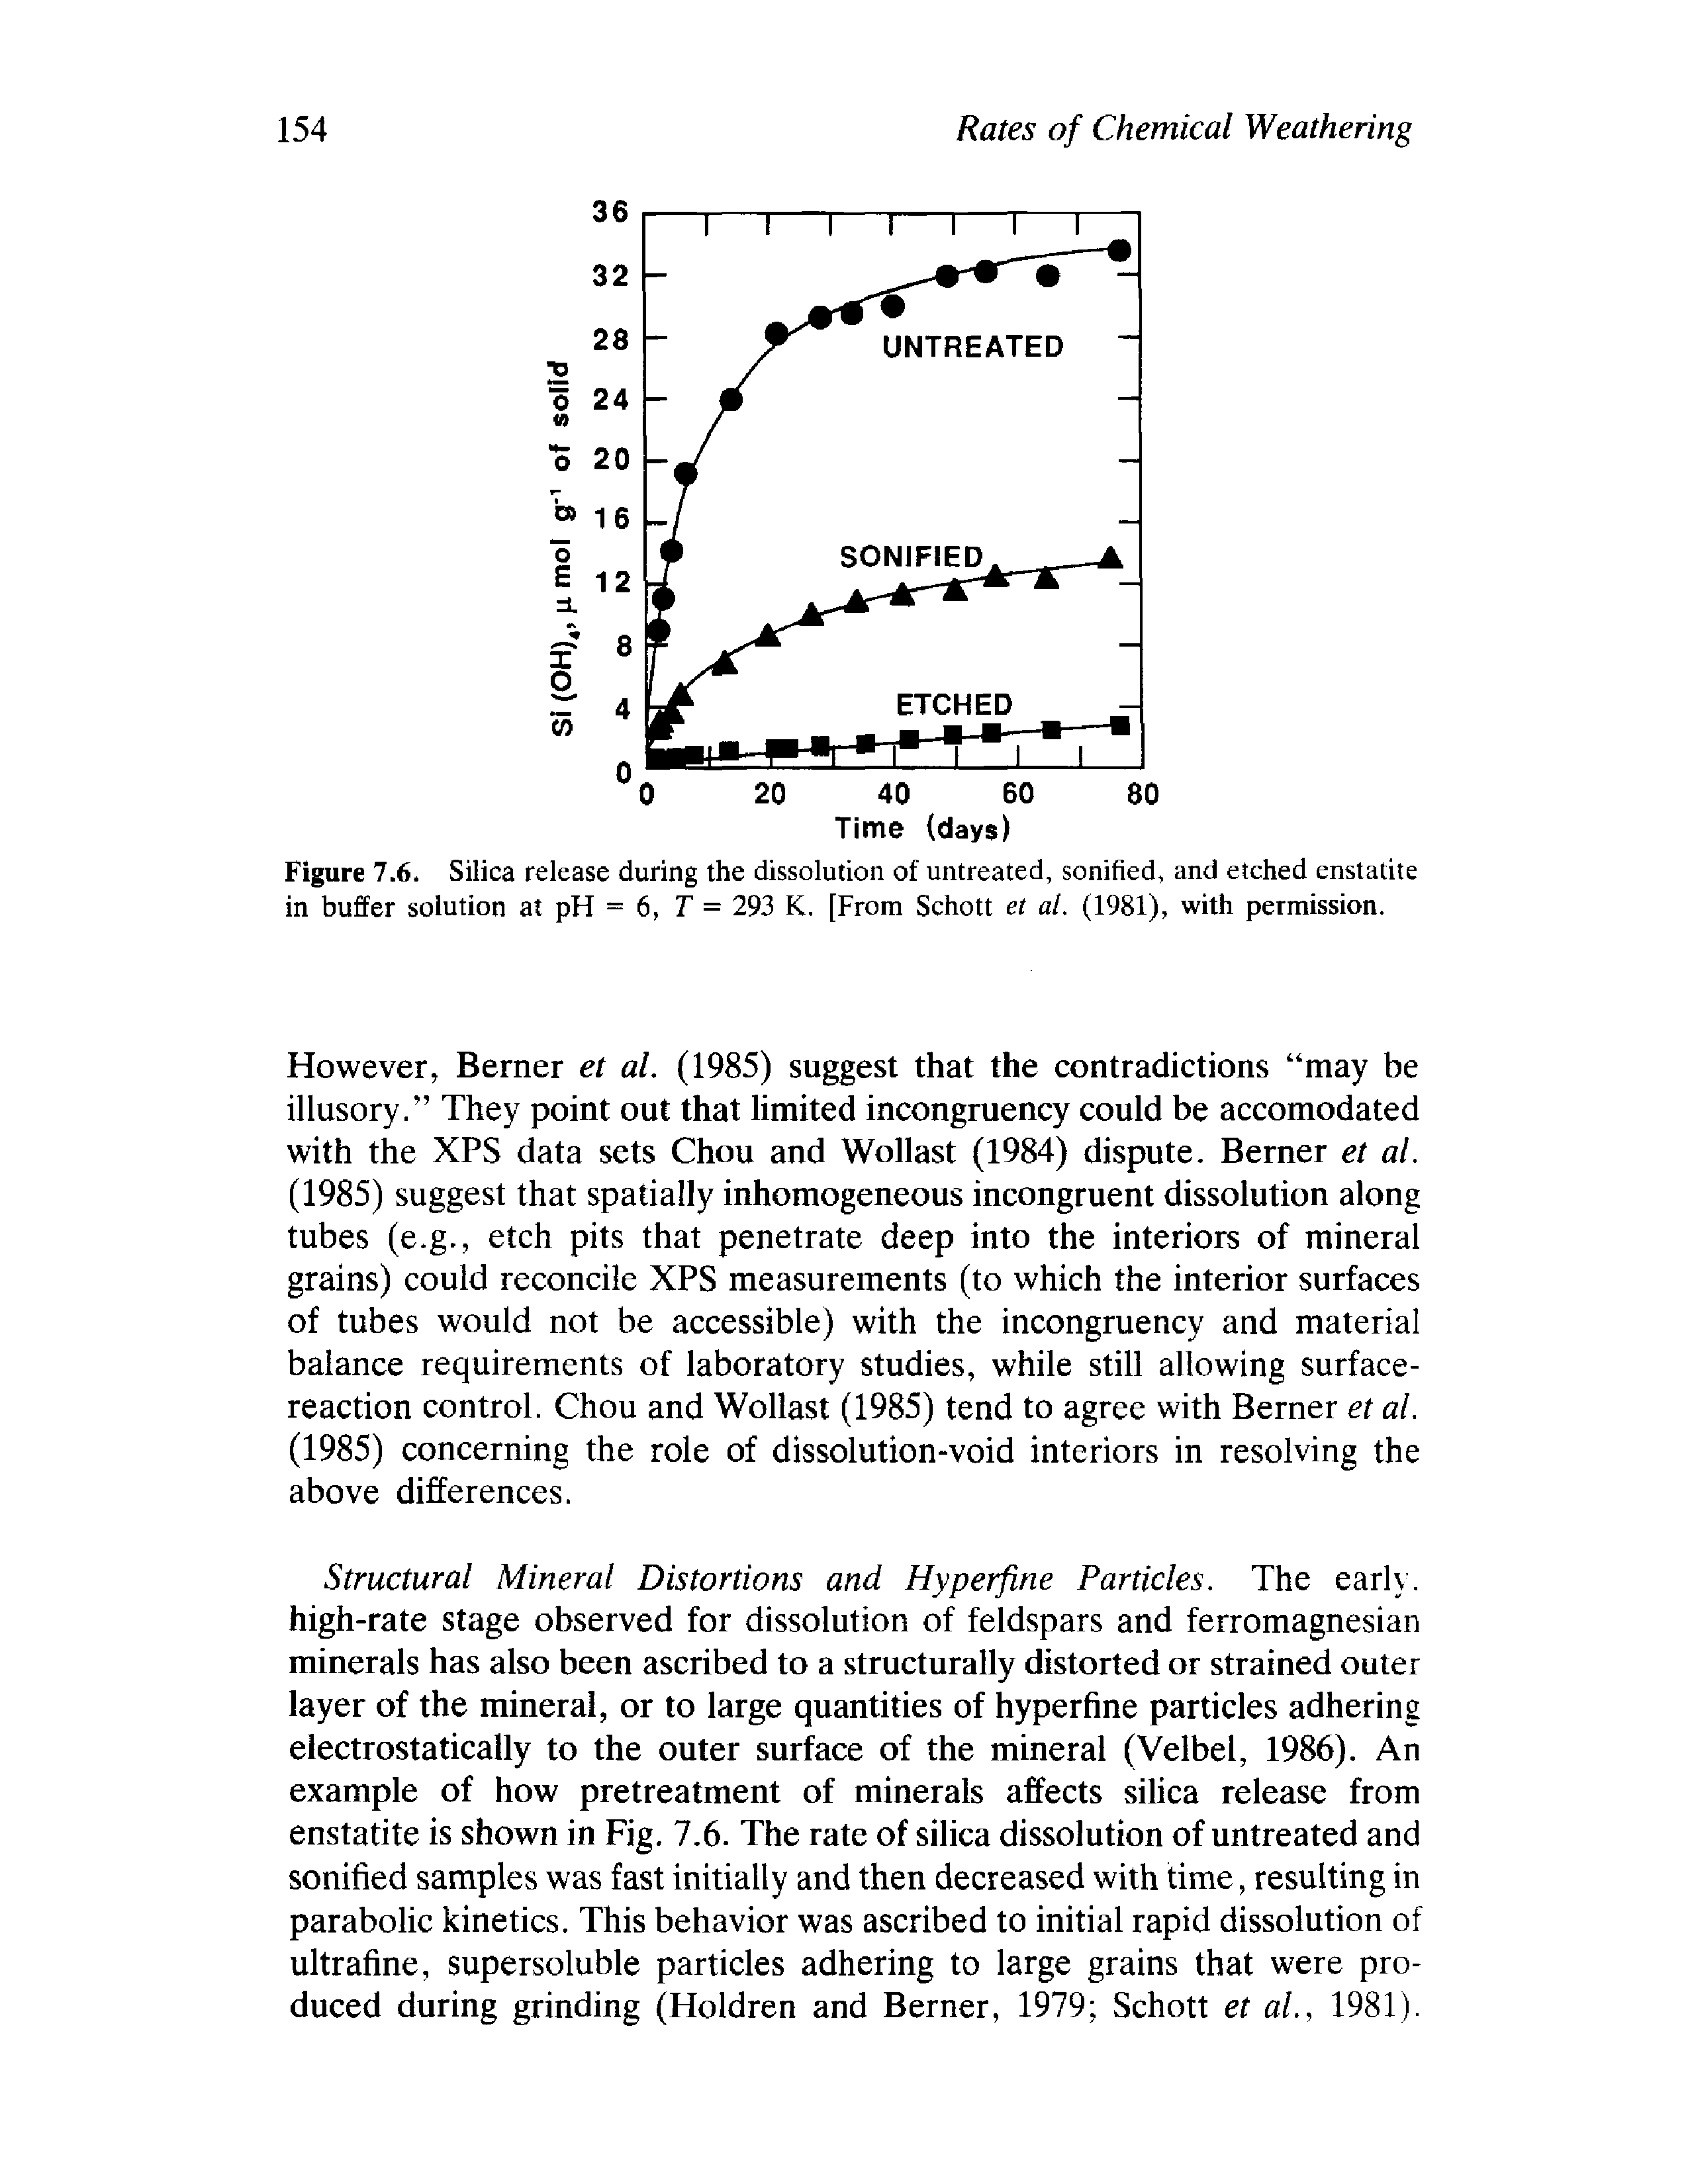 Figure 7.6. Silica release during the dissolution of untreated, sonified, and etched enstatite in buffer solution at pH = 6, T = 293 K, [From Schott et al. (1981), with permission.